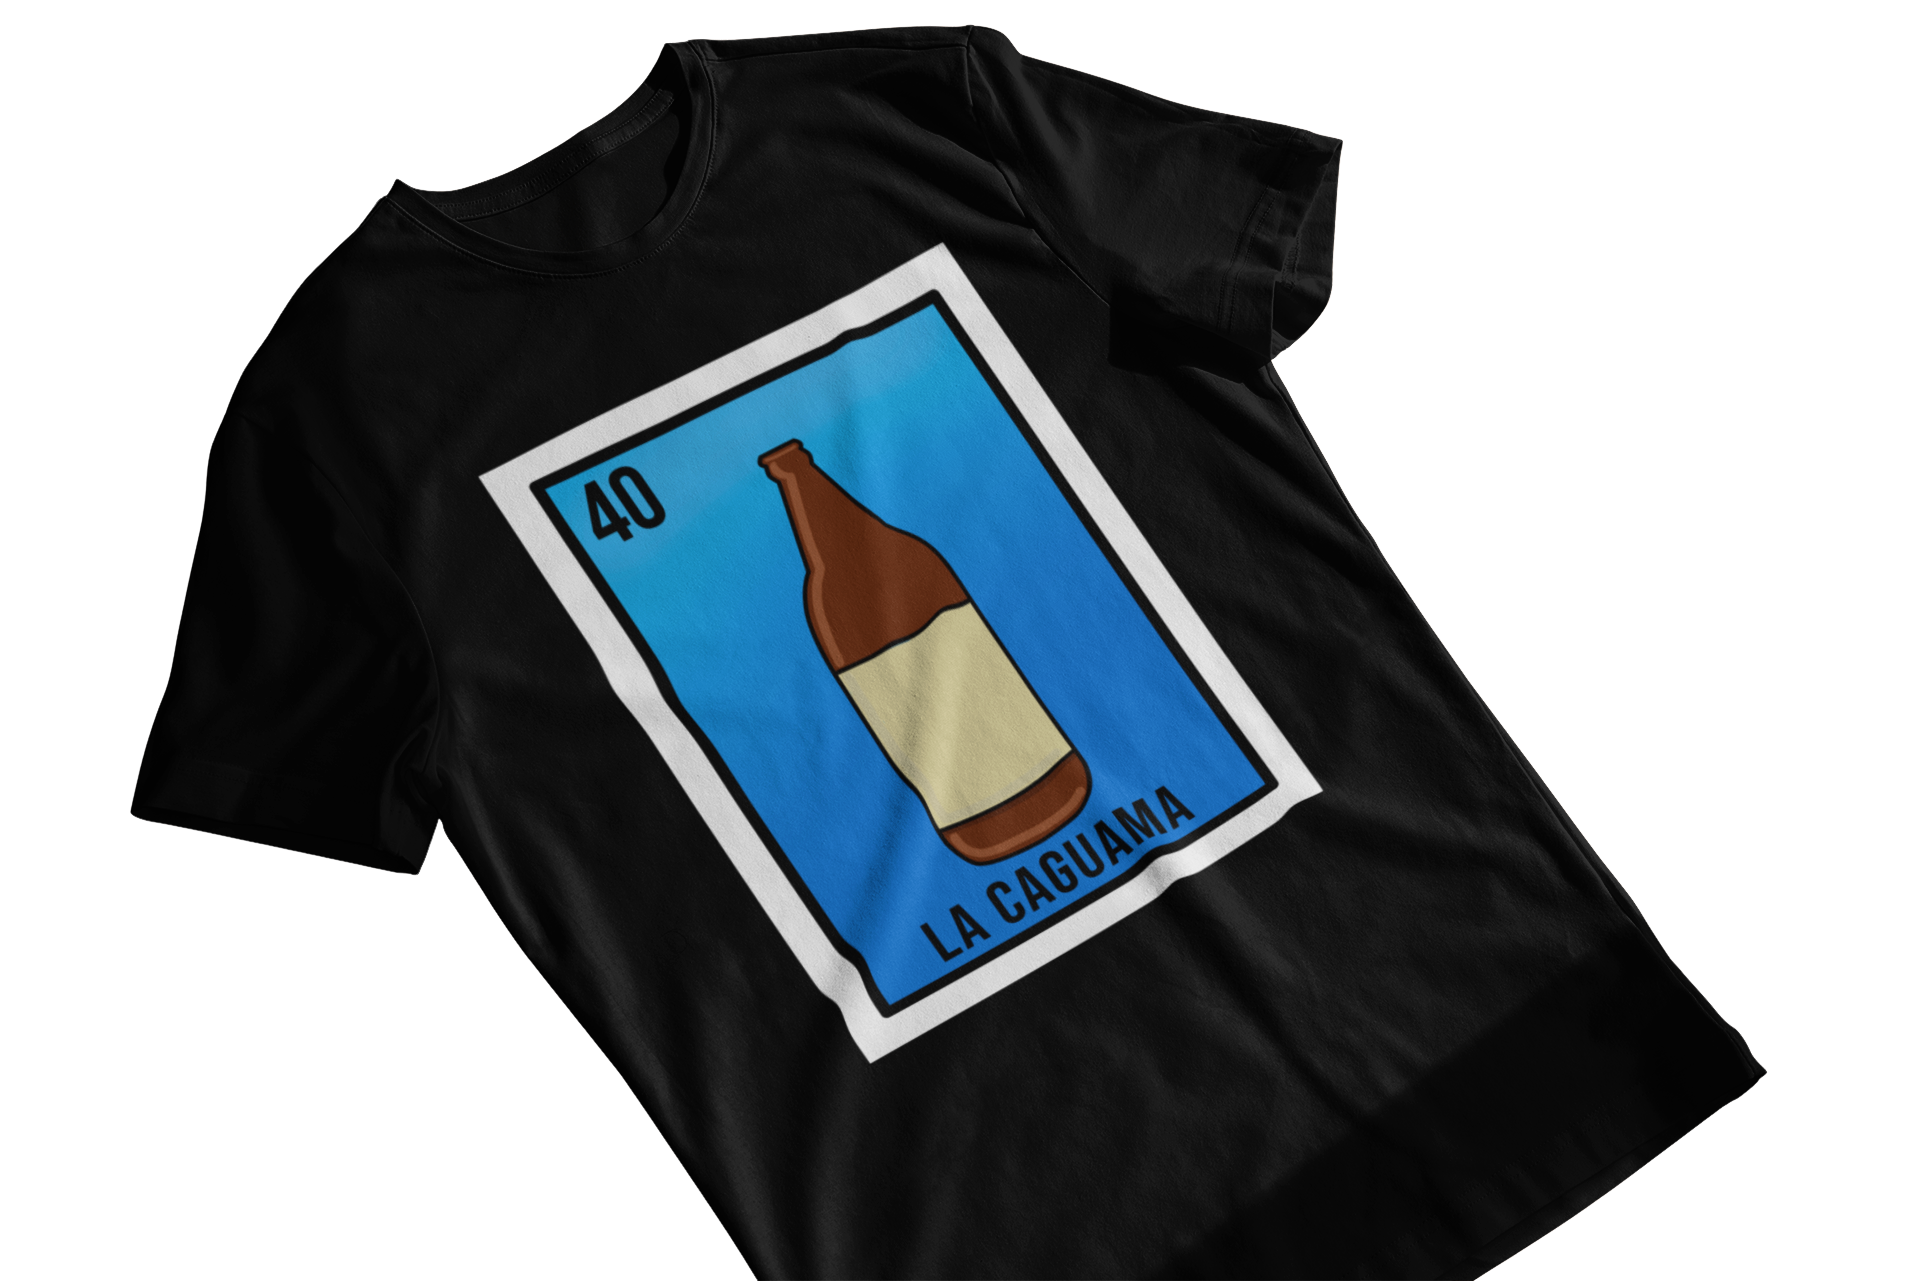 Black t-shirt for Latino men with a Lotería-inspired design featuring a cartoon-style beer bottle with the text "la caguama" in a card-like format